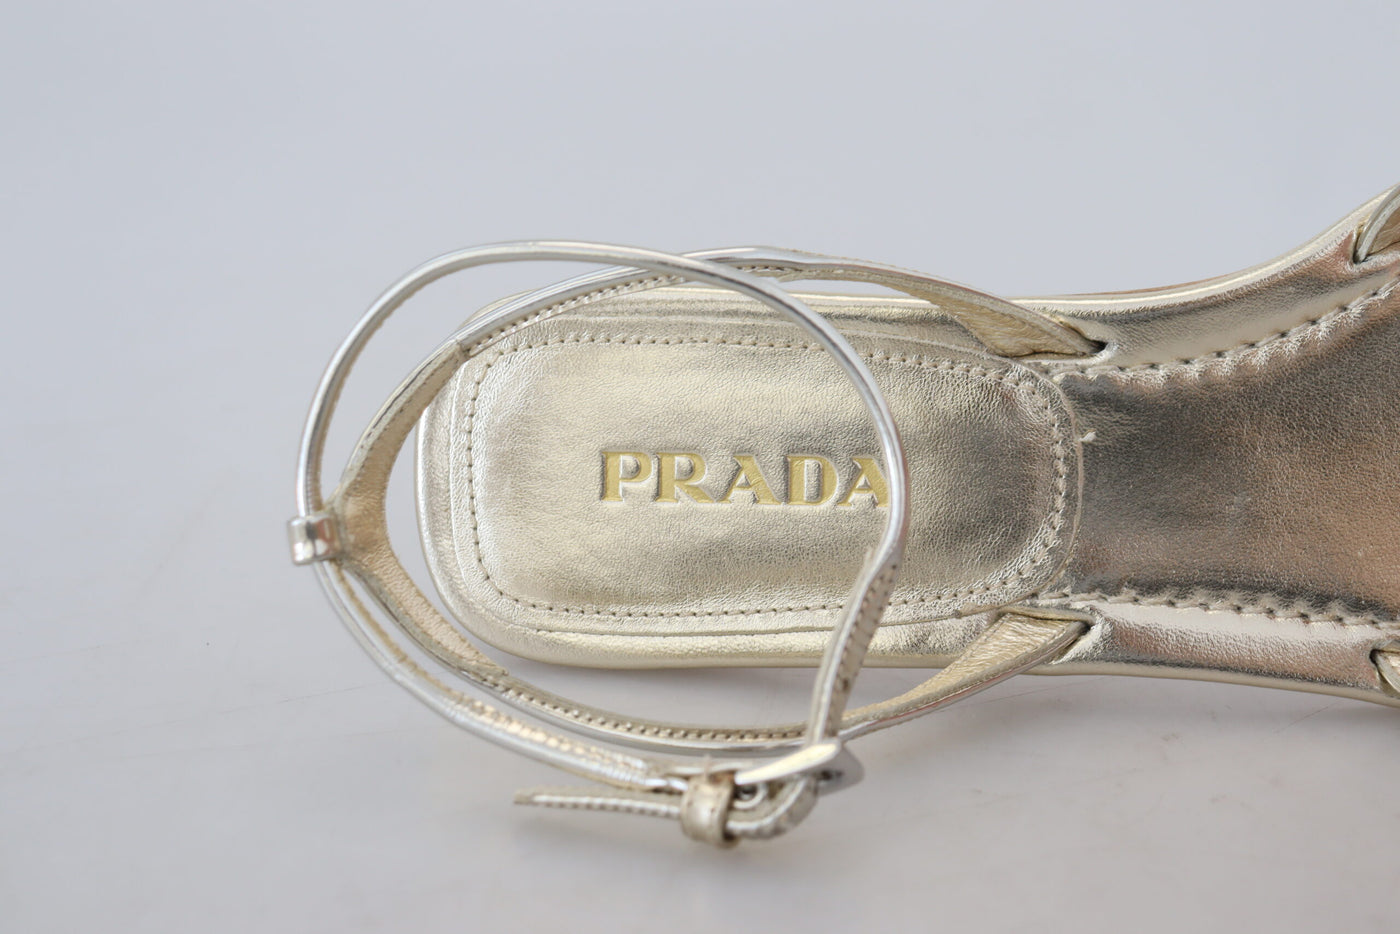 Prada Metallic Silver Leather Sandals Ankle Strap Flats Shoes